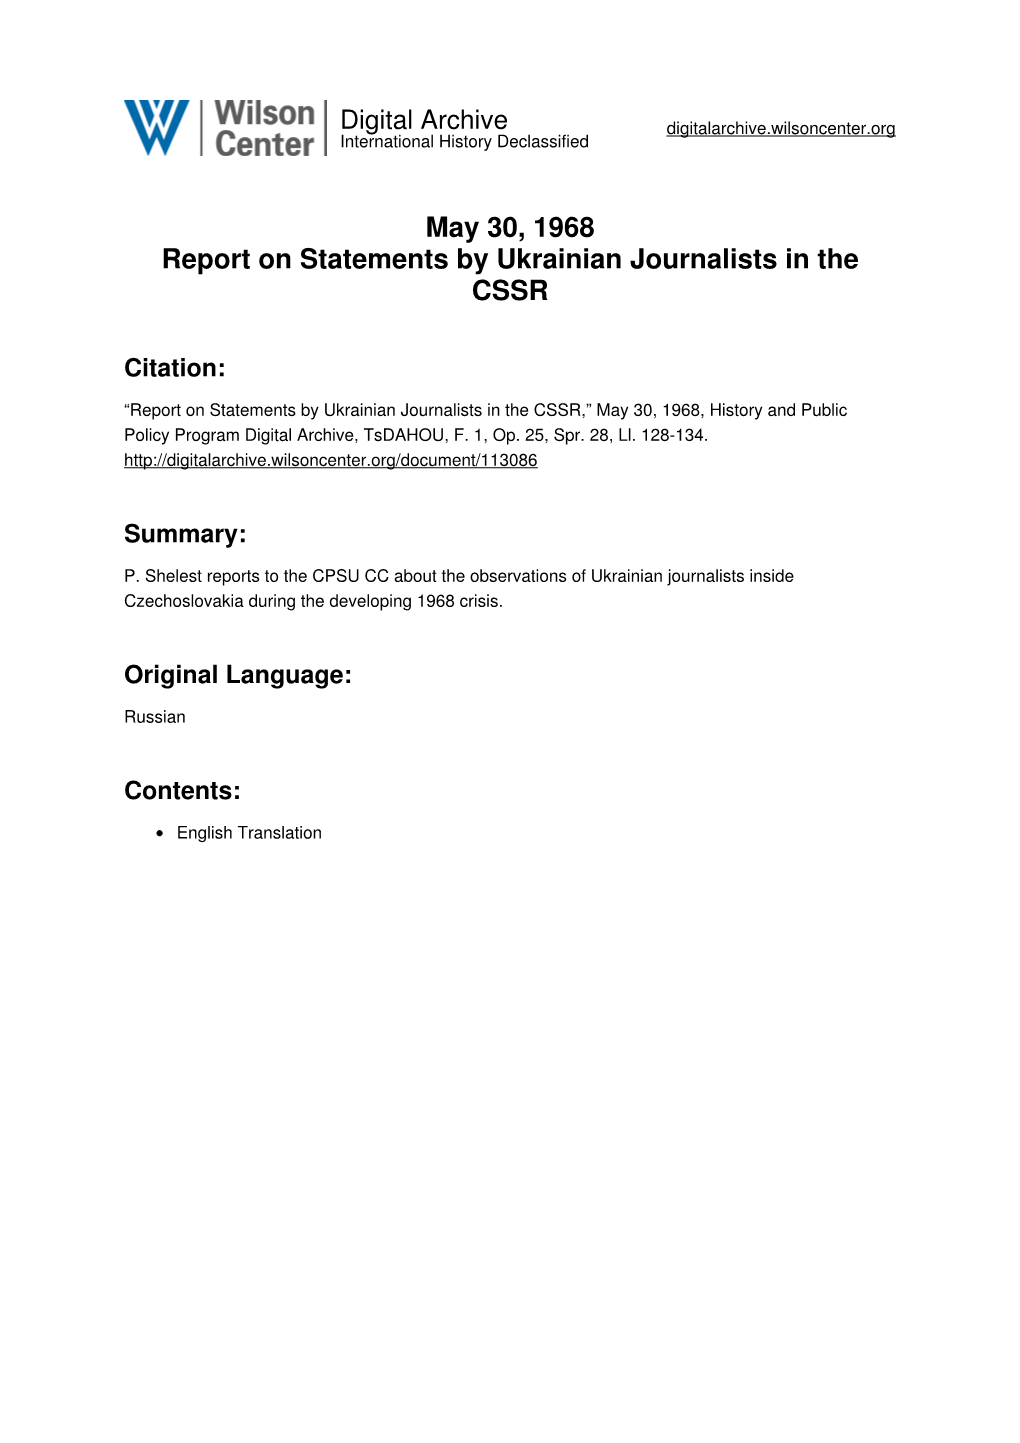 May 30, 1968 Report on Statements by Ukrainian Journalists in the CSSR